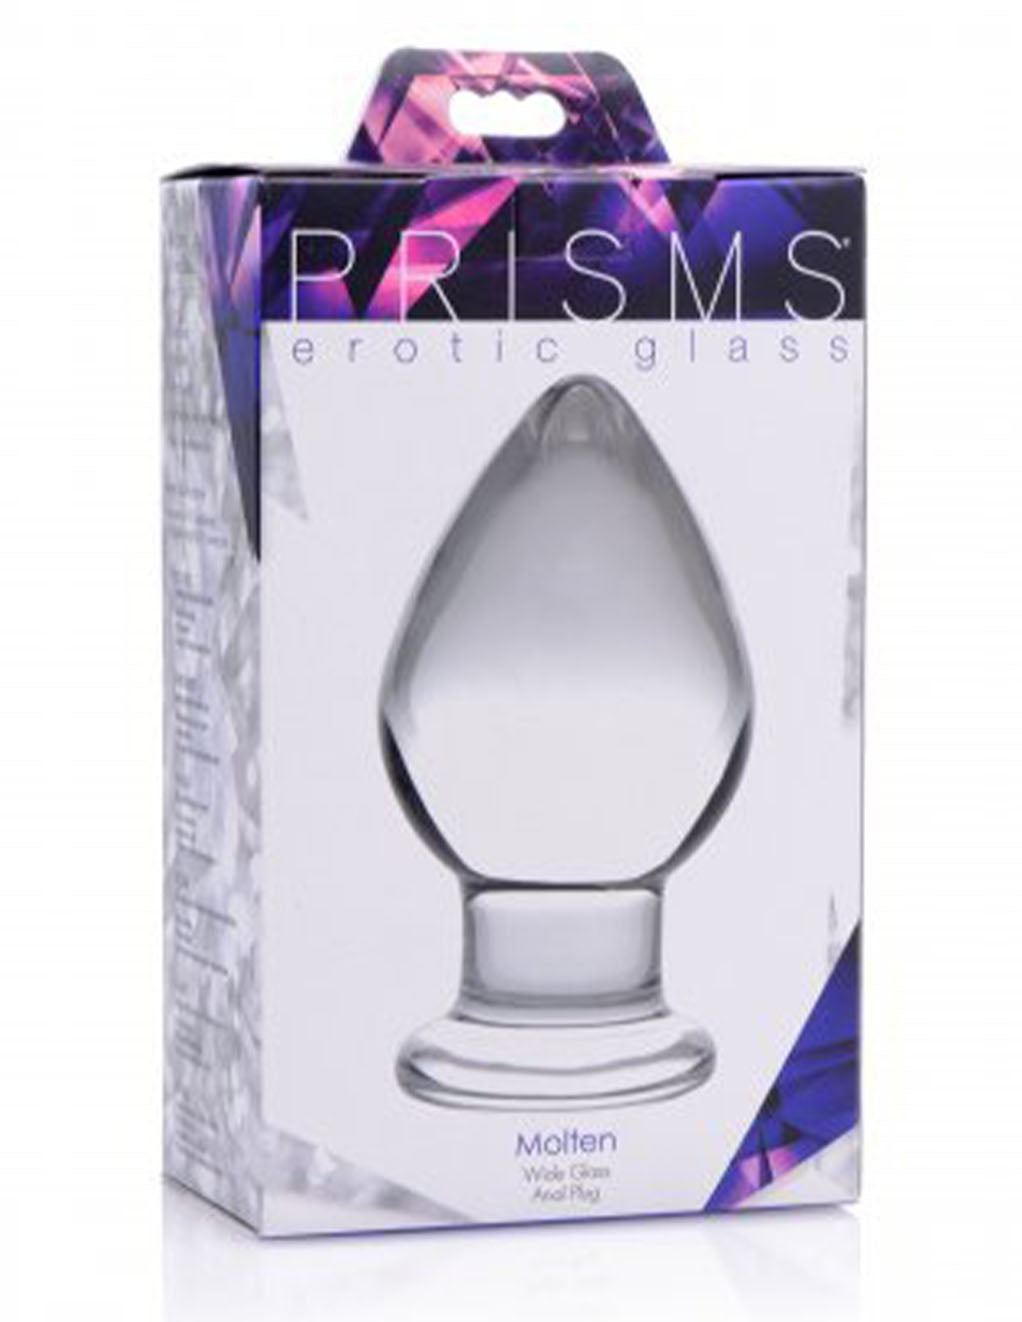 Prisms Erotic Glass Molten Wide Glass Butt Plug- package